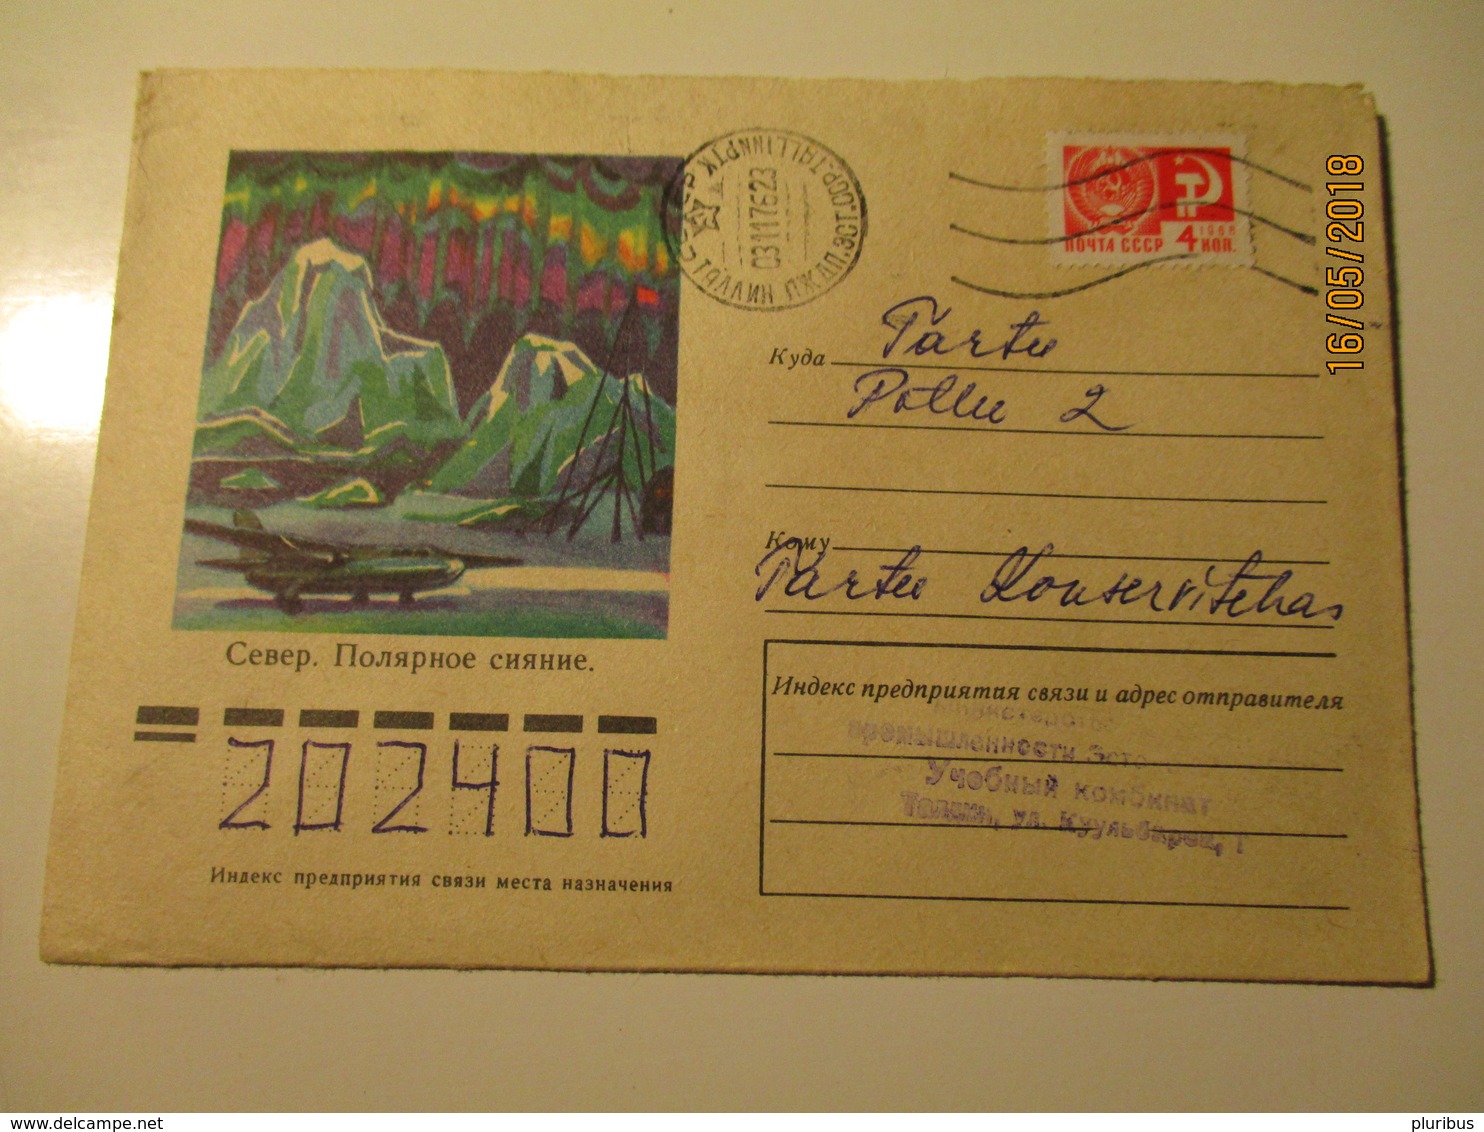 USSR RUSSIA  1976 COVER NORTH POLE  AIRPLANE  RADIO TOWER ,   COVER     , 0 - Forschungsstationen & Arctic Driftstationen